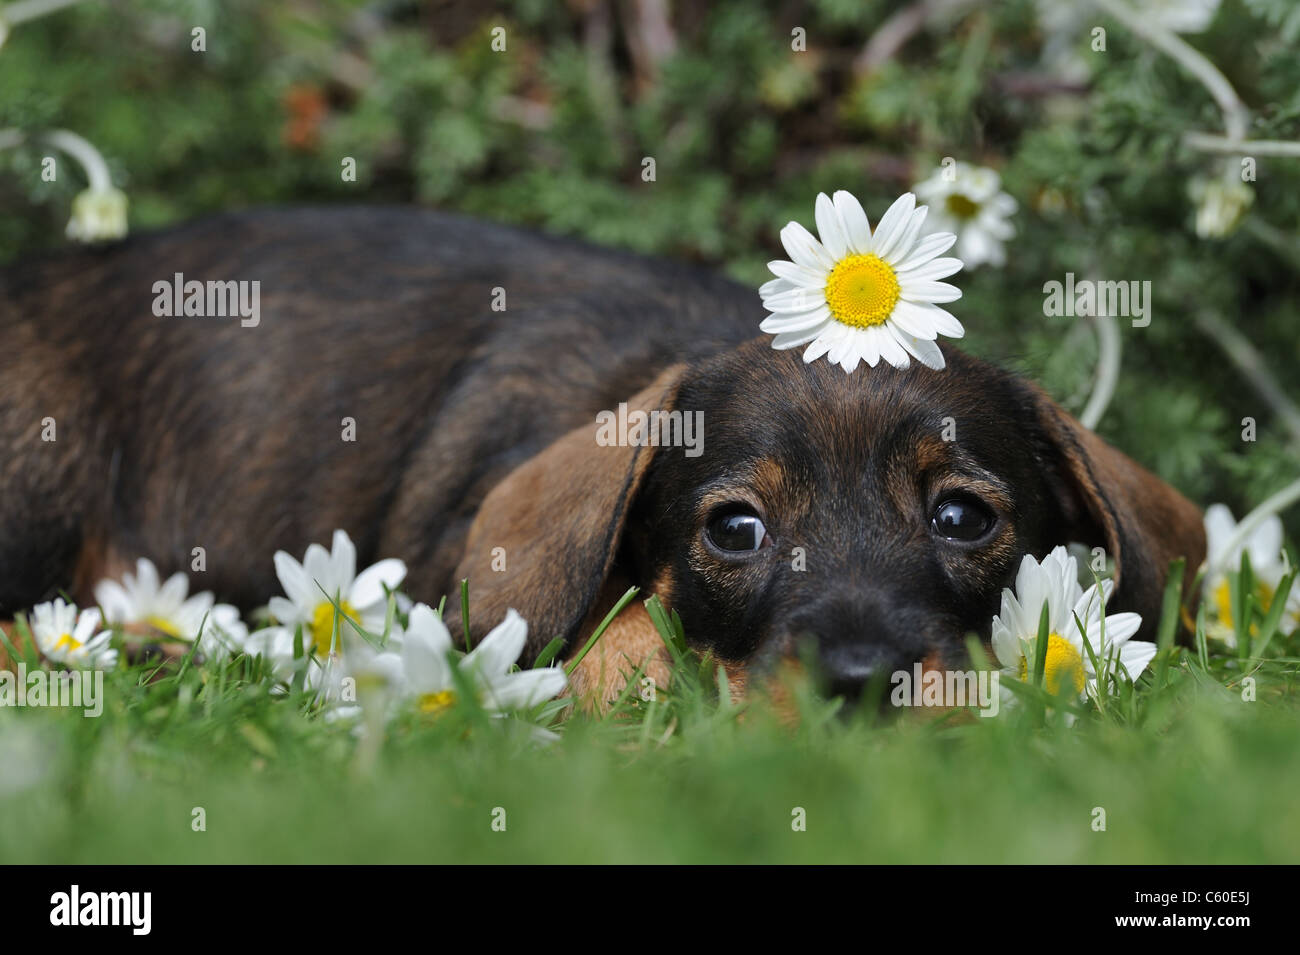 Wire-haired Dachshund (Canis lupus familiaris). Puppy with a Oxeye Daisy flower on its head lying flat on grass in a garden. Stock Photo